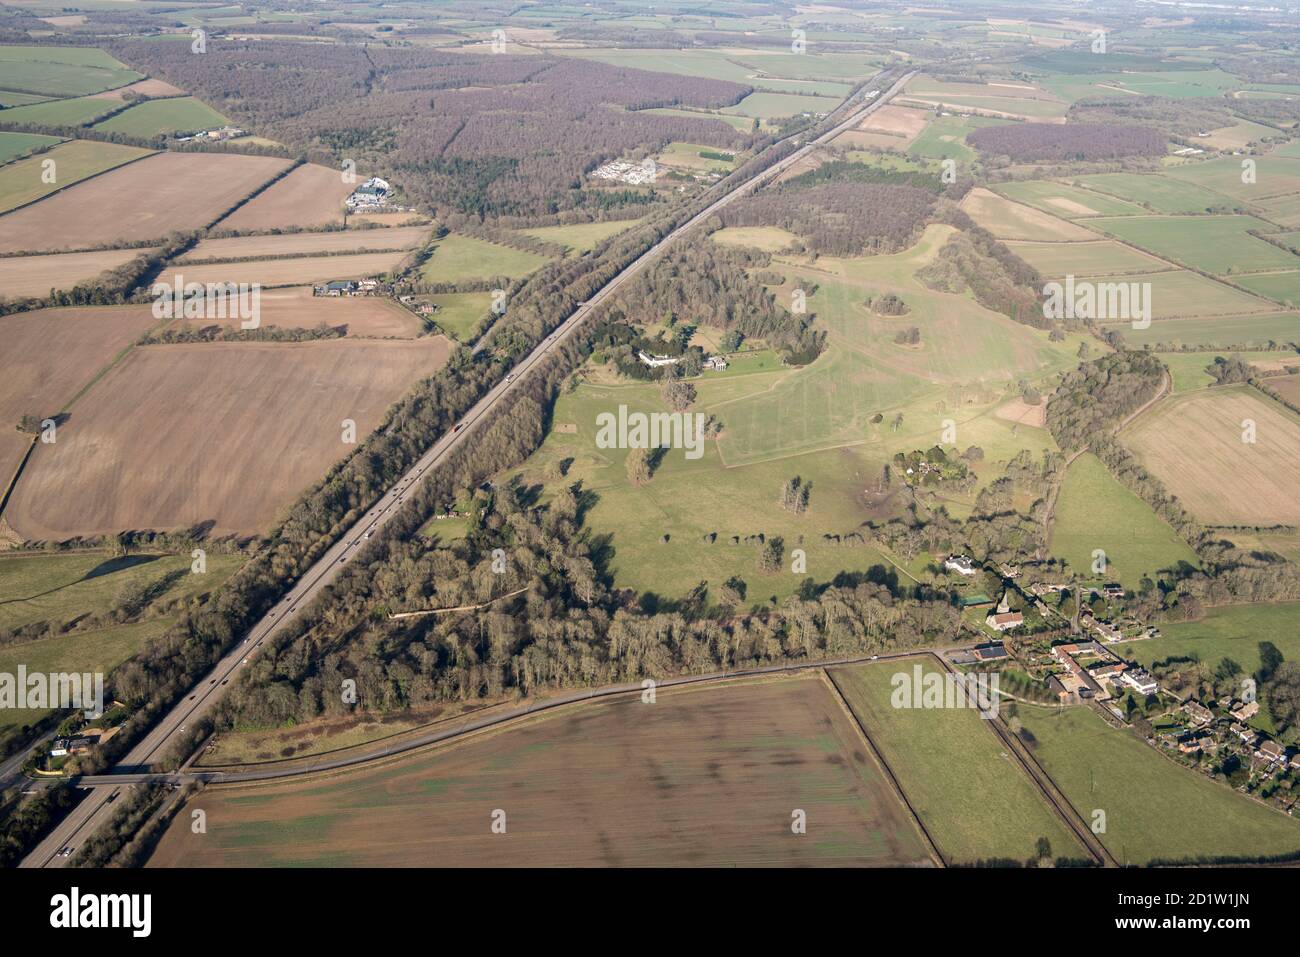 Landscape park at Stratton Park, designed by Humphry Repton in 1801, Micheldever, Hampshire, UK. Aerial view. Stock Photo